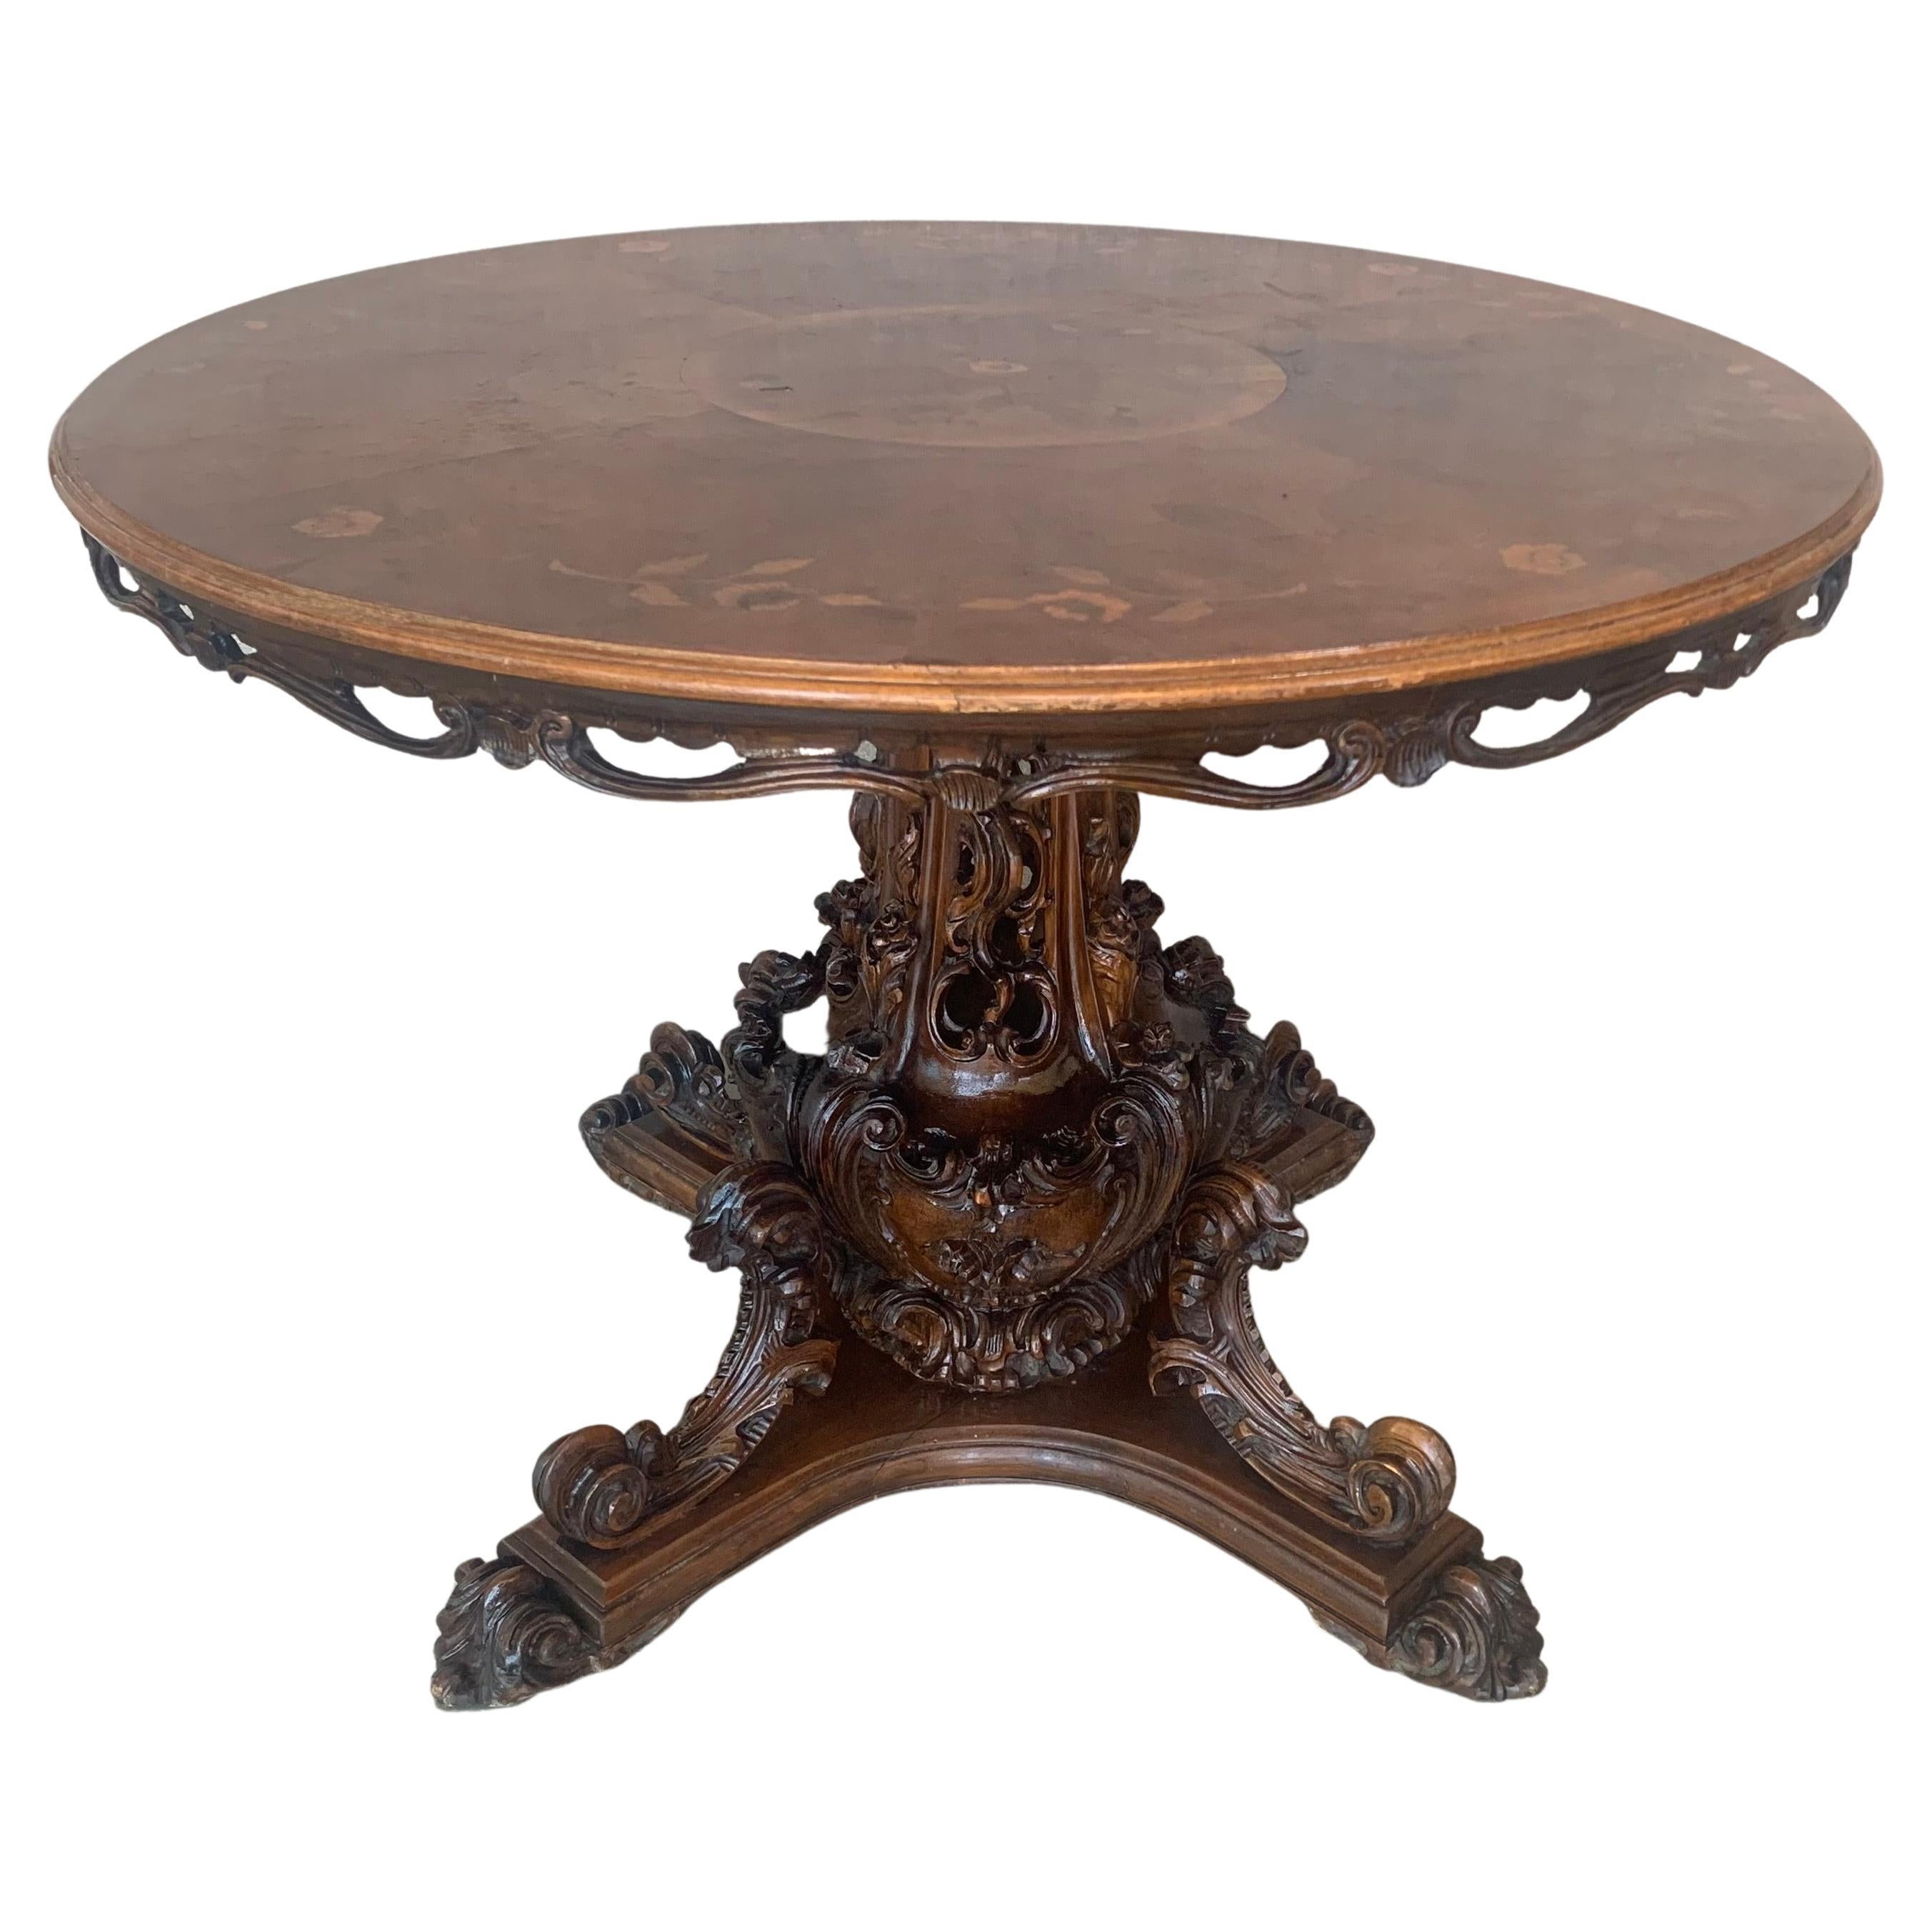 English Regency Round Table with Carved Center Pedestal in Mahogany, circa 1825